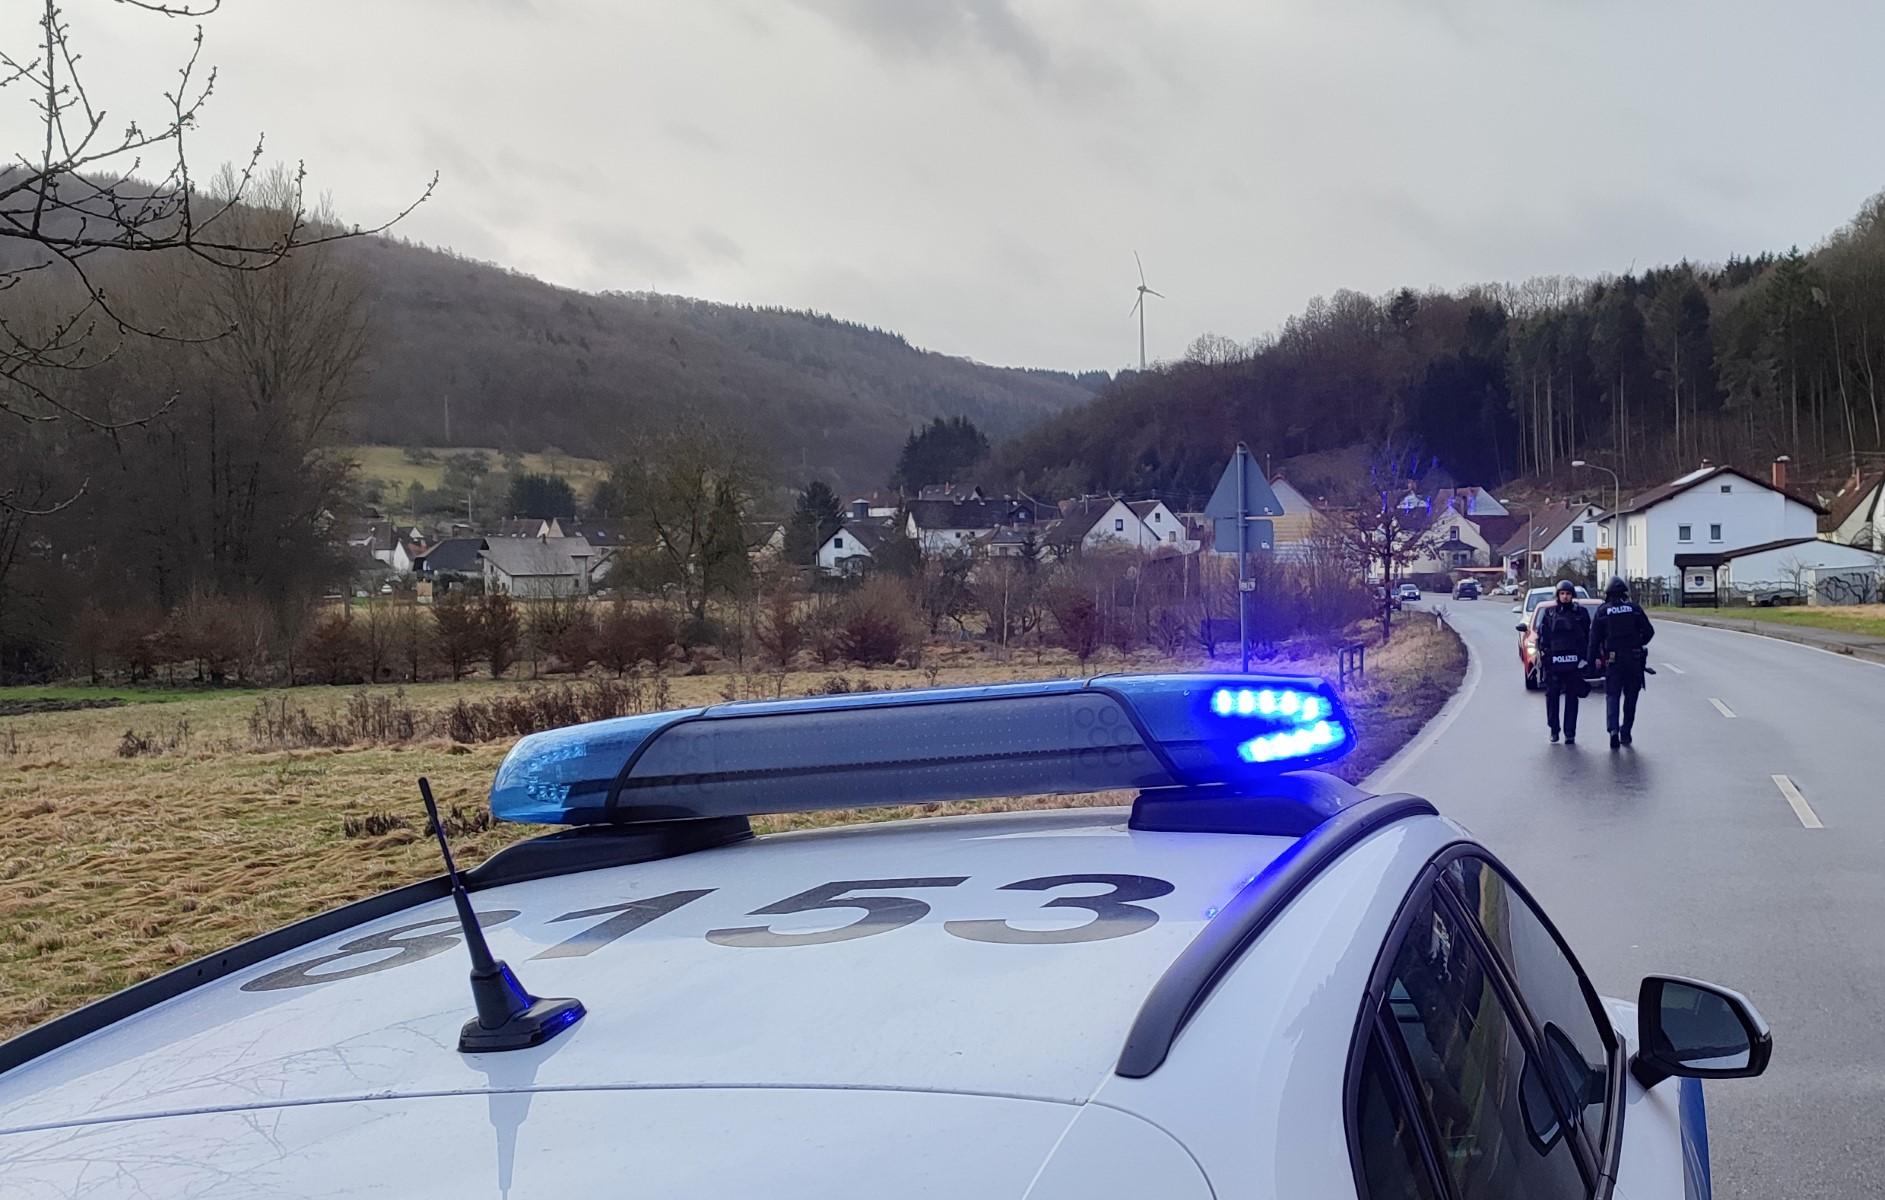 Police direct traffic near the site where two officers were shot dead in the early morning during a routine patrol in Kusel, Rhineland-Palatinate, western Germany on Jan 31. Photo: AFP